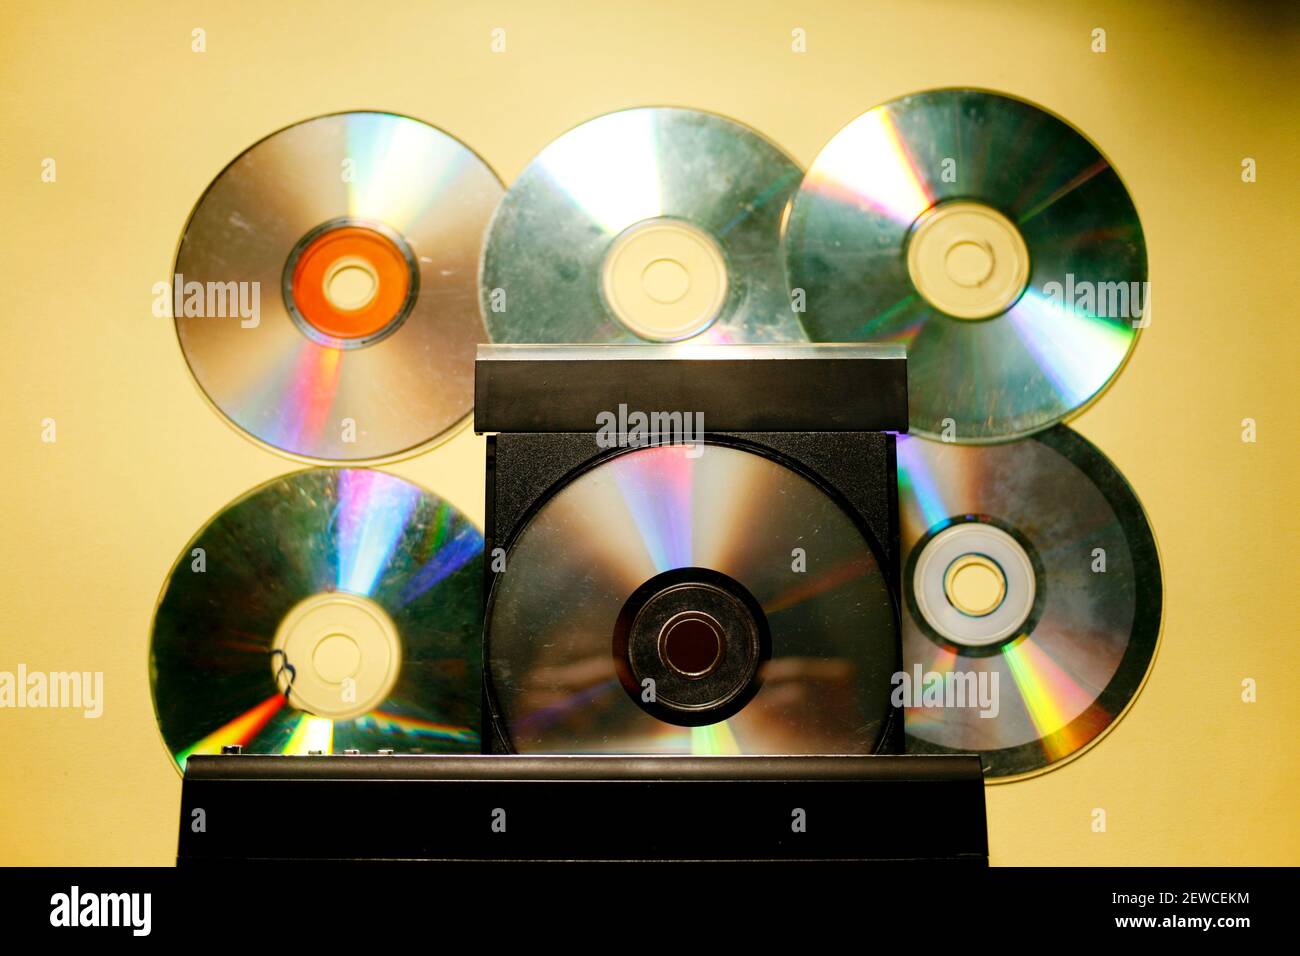 close up of  vcd or dvd player with open tray Stock Photo